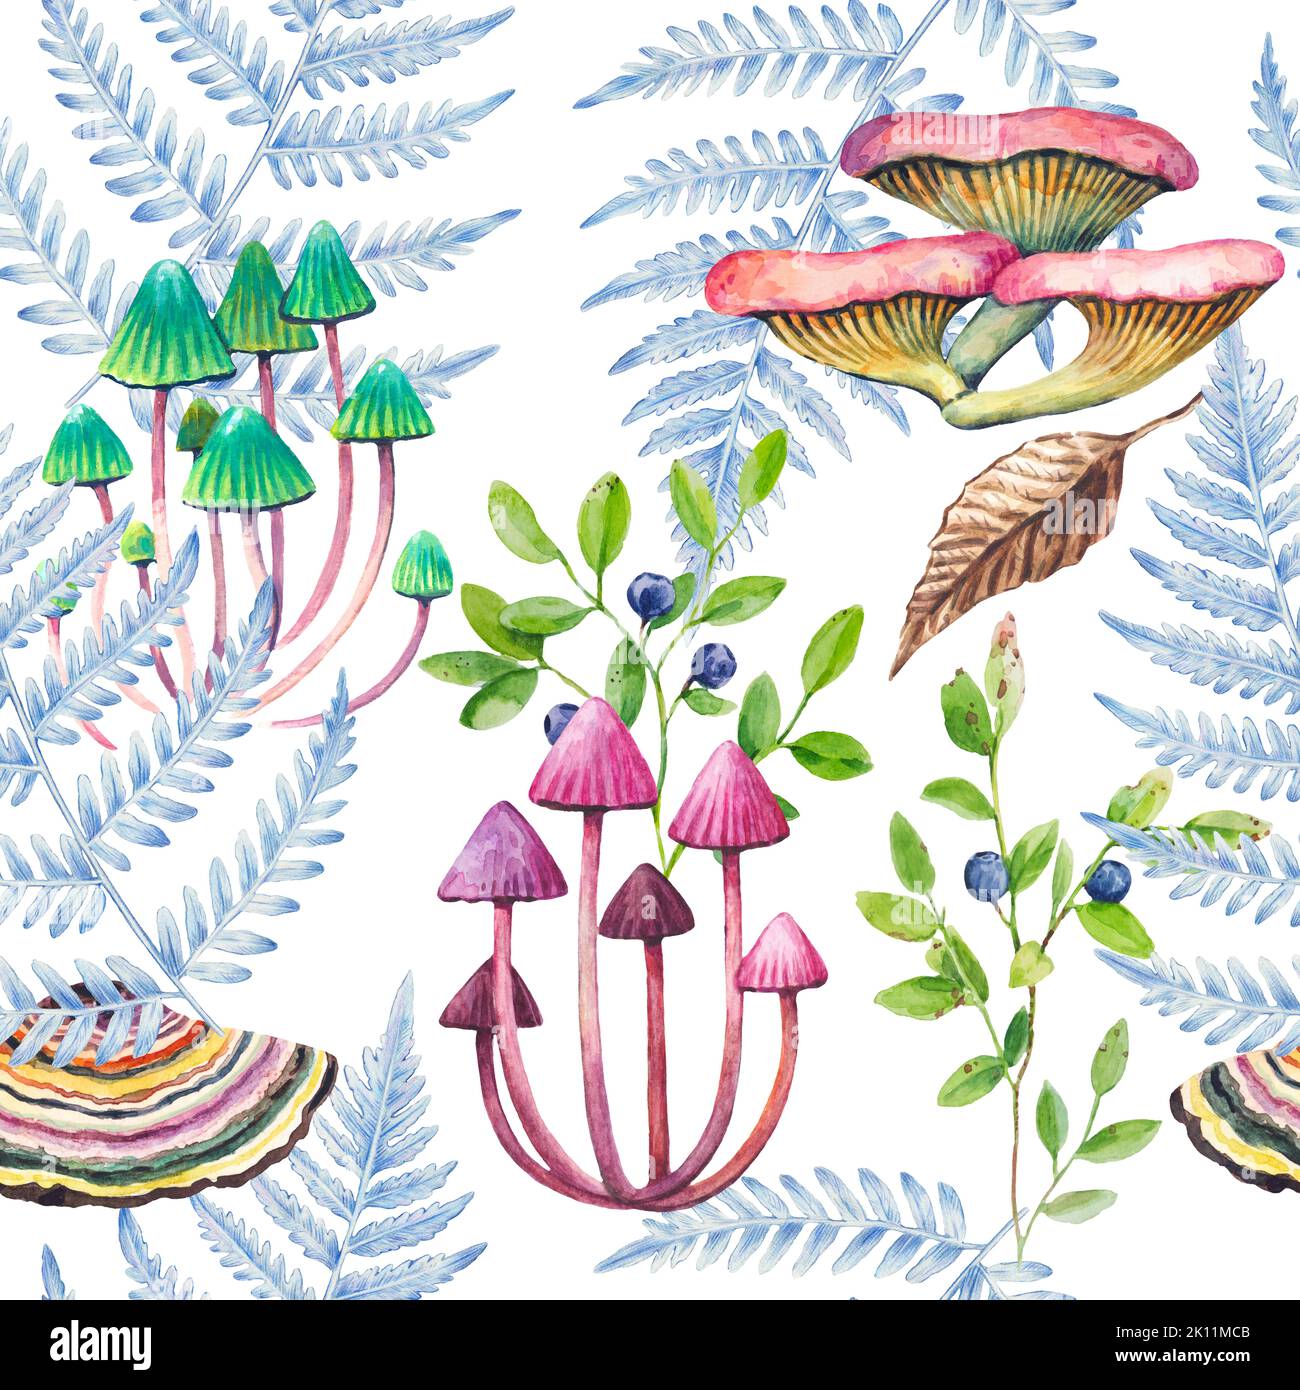 Hand drawn seamless pattern with fern leaves and mushrooms. Detailed watercolor botanical illustration. Stock Photo